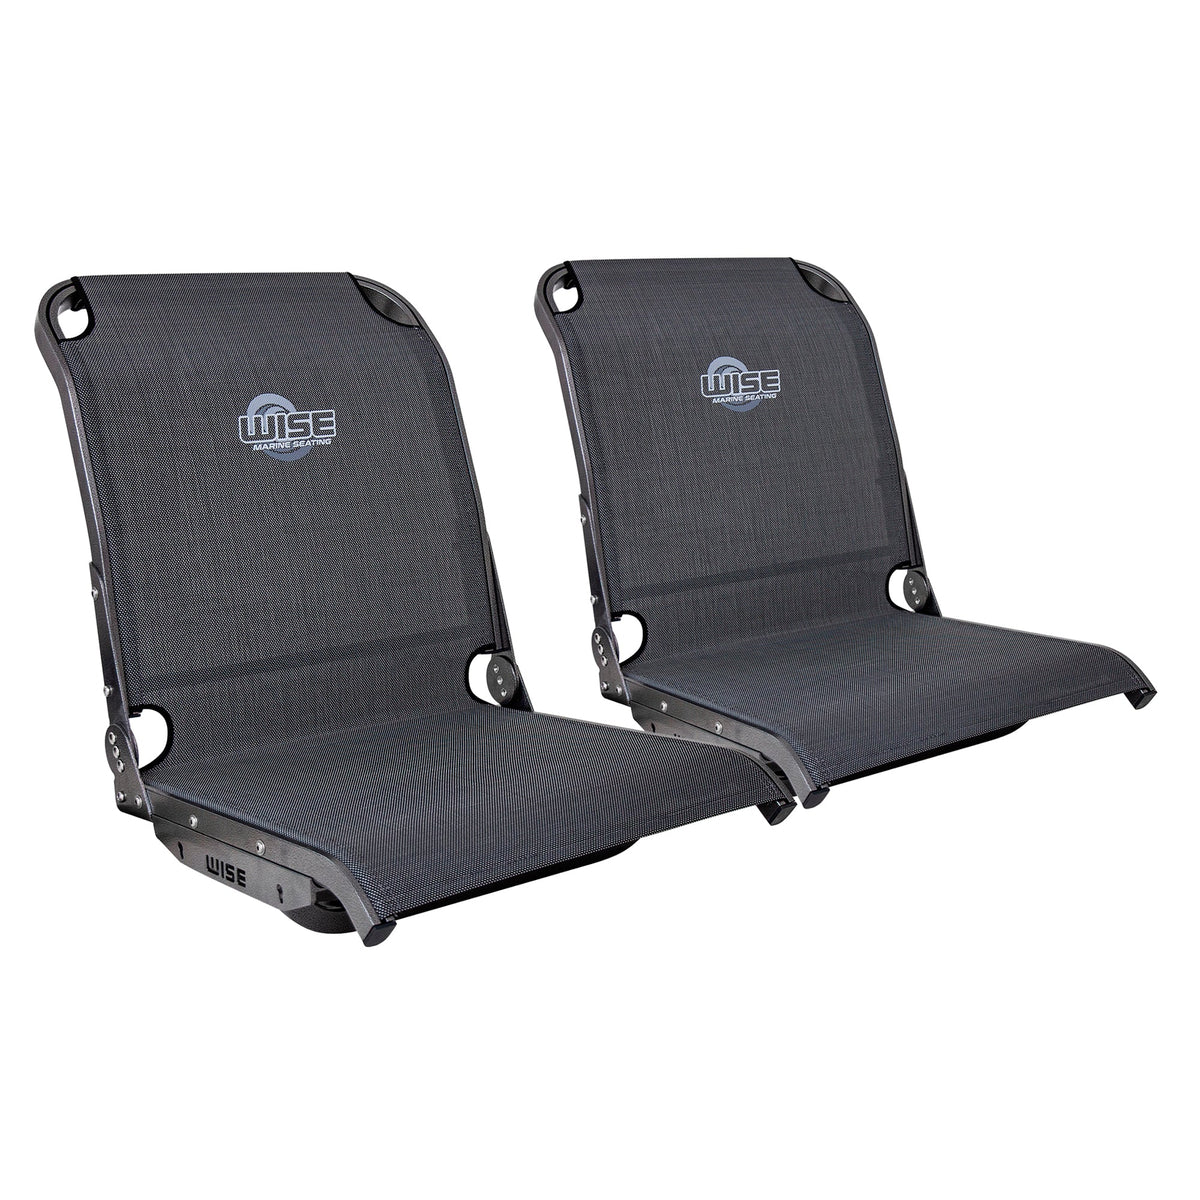 Wise 3373 AeroX™ Mesh High Back Boat Seat - Double Pack – Boatseats